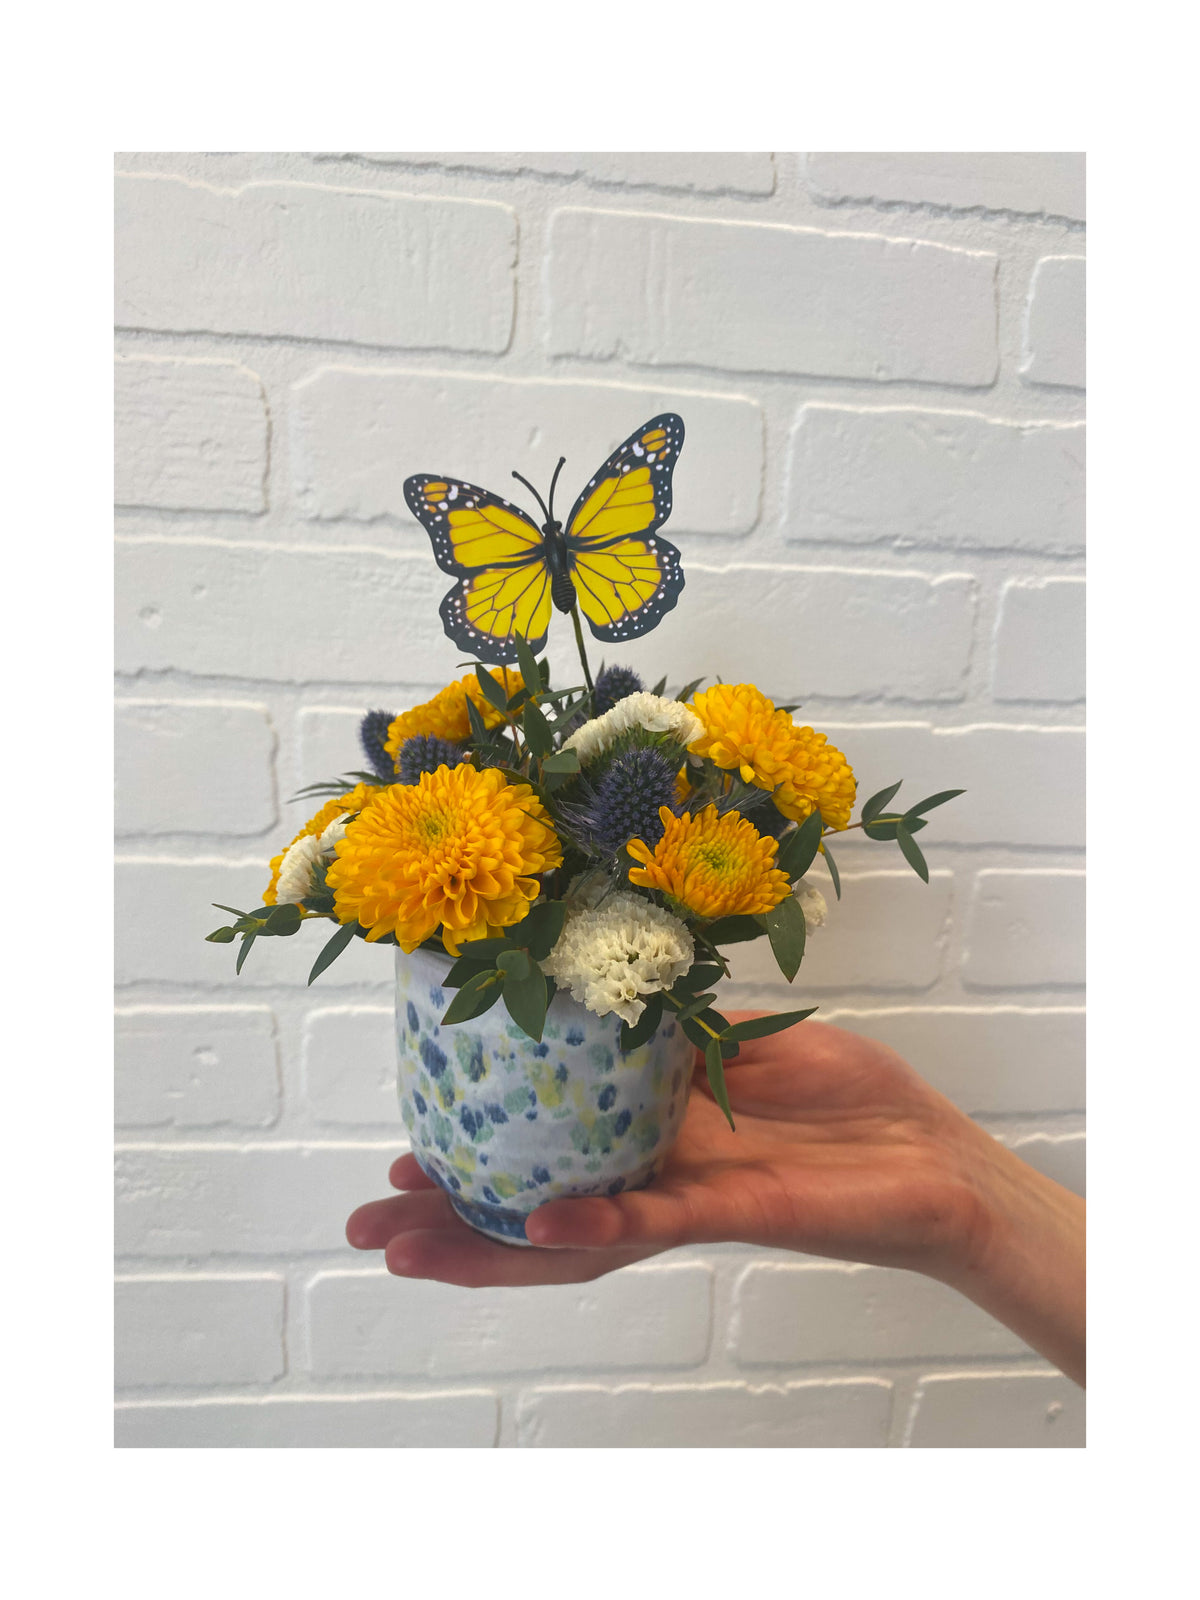 Small floral arrangement with blue, white and yellow.